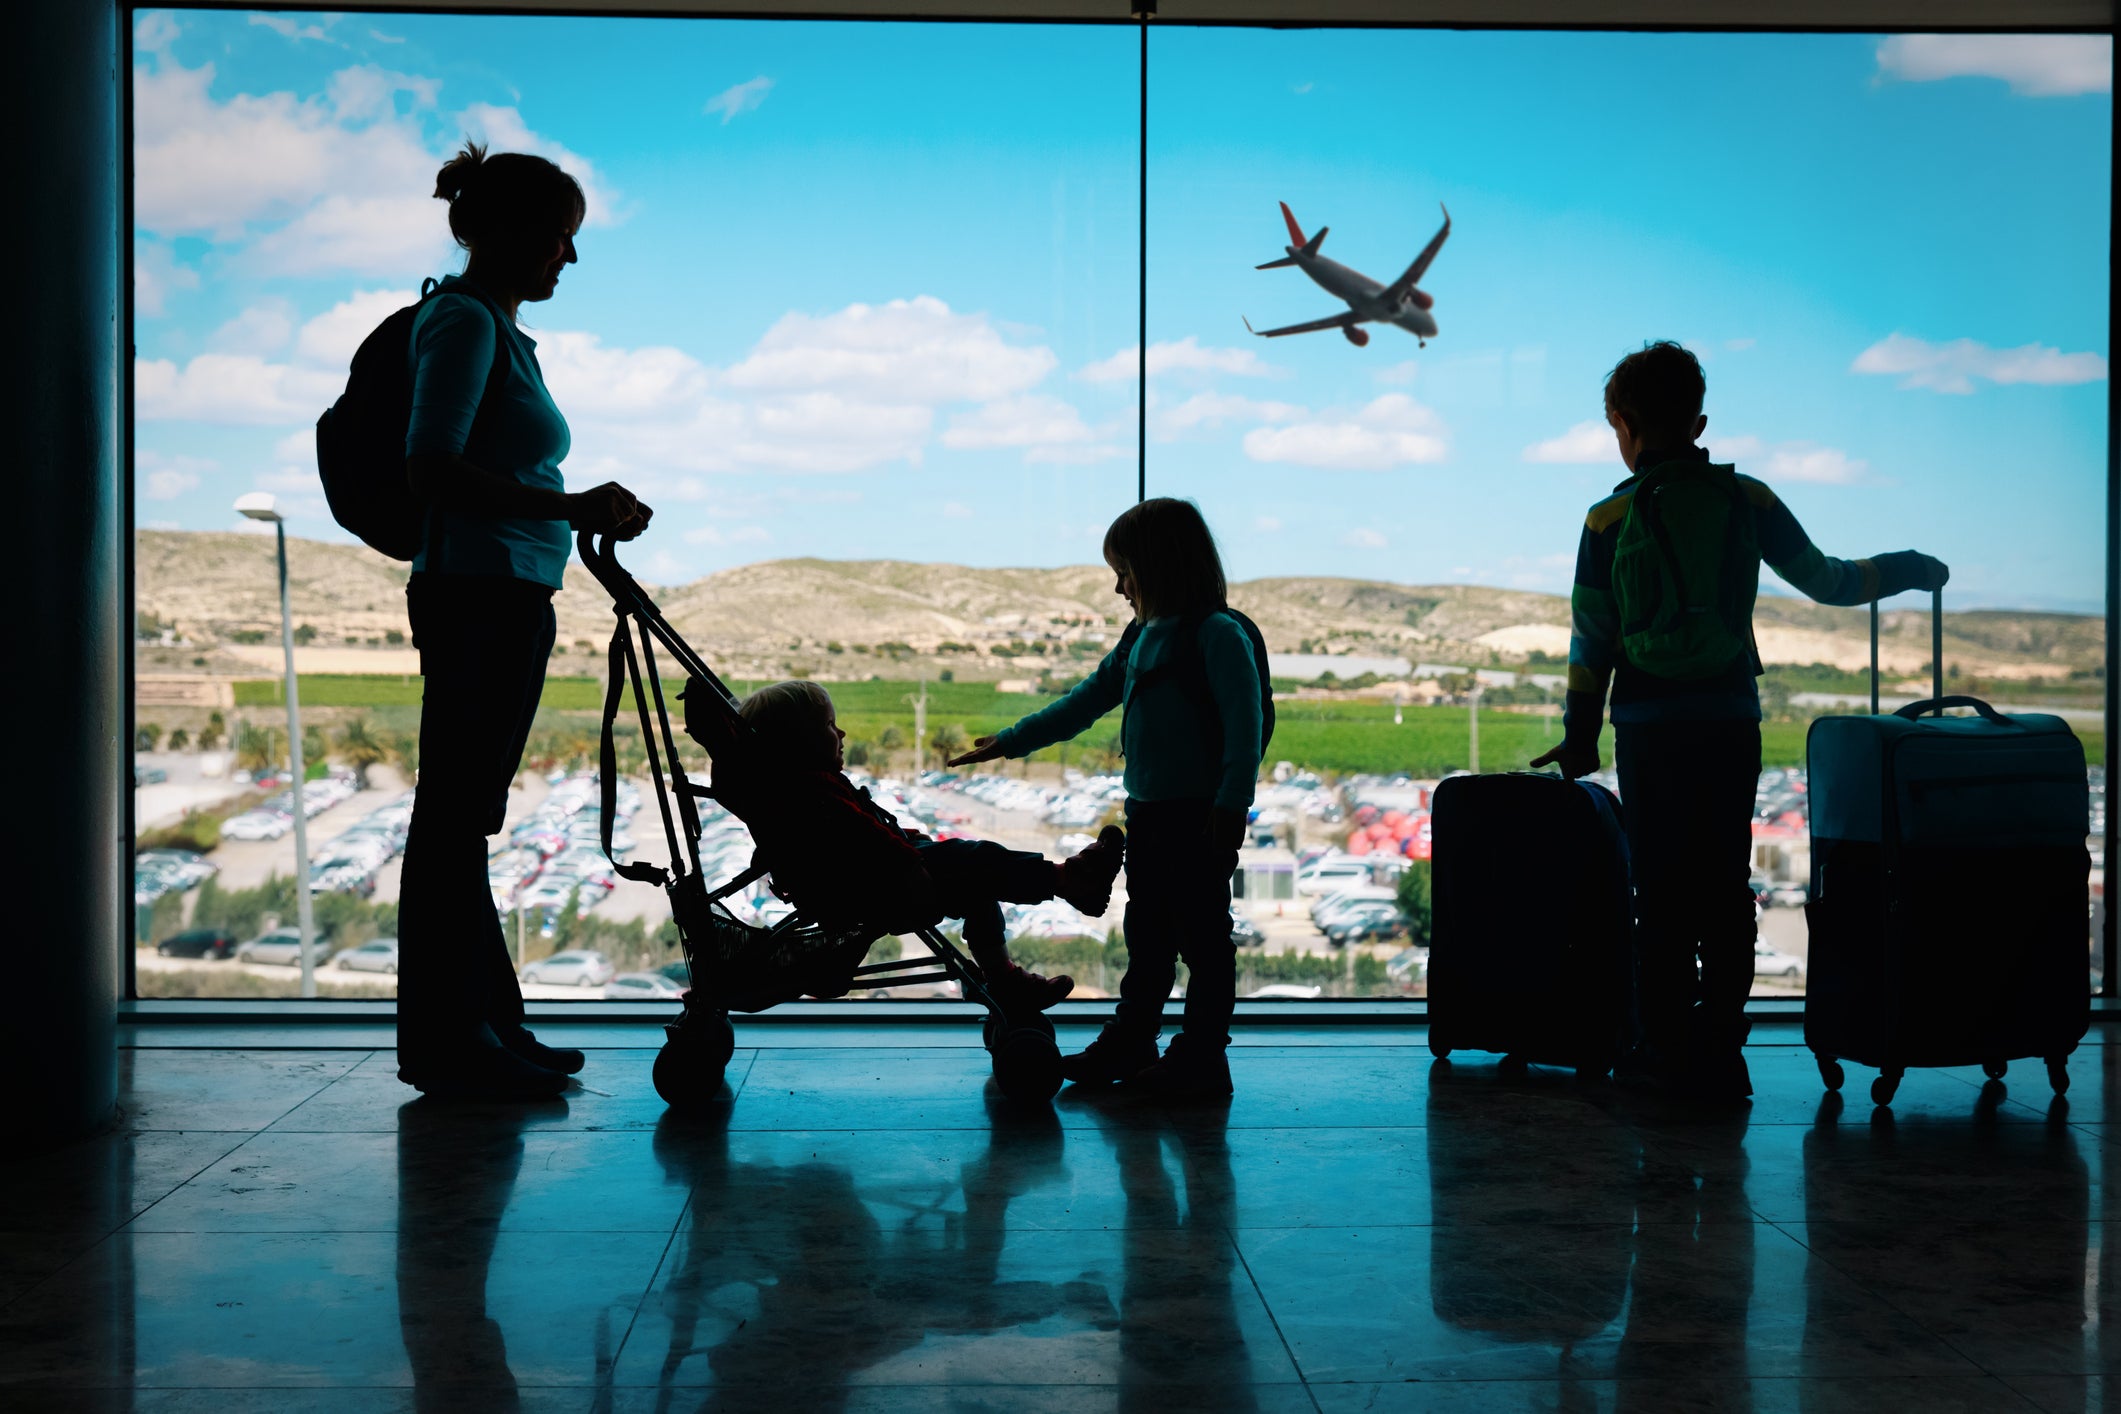 mother with kids and luggage looking at planes in airport